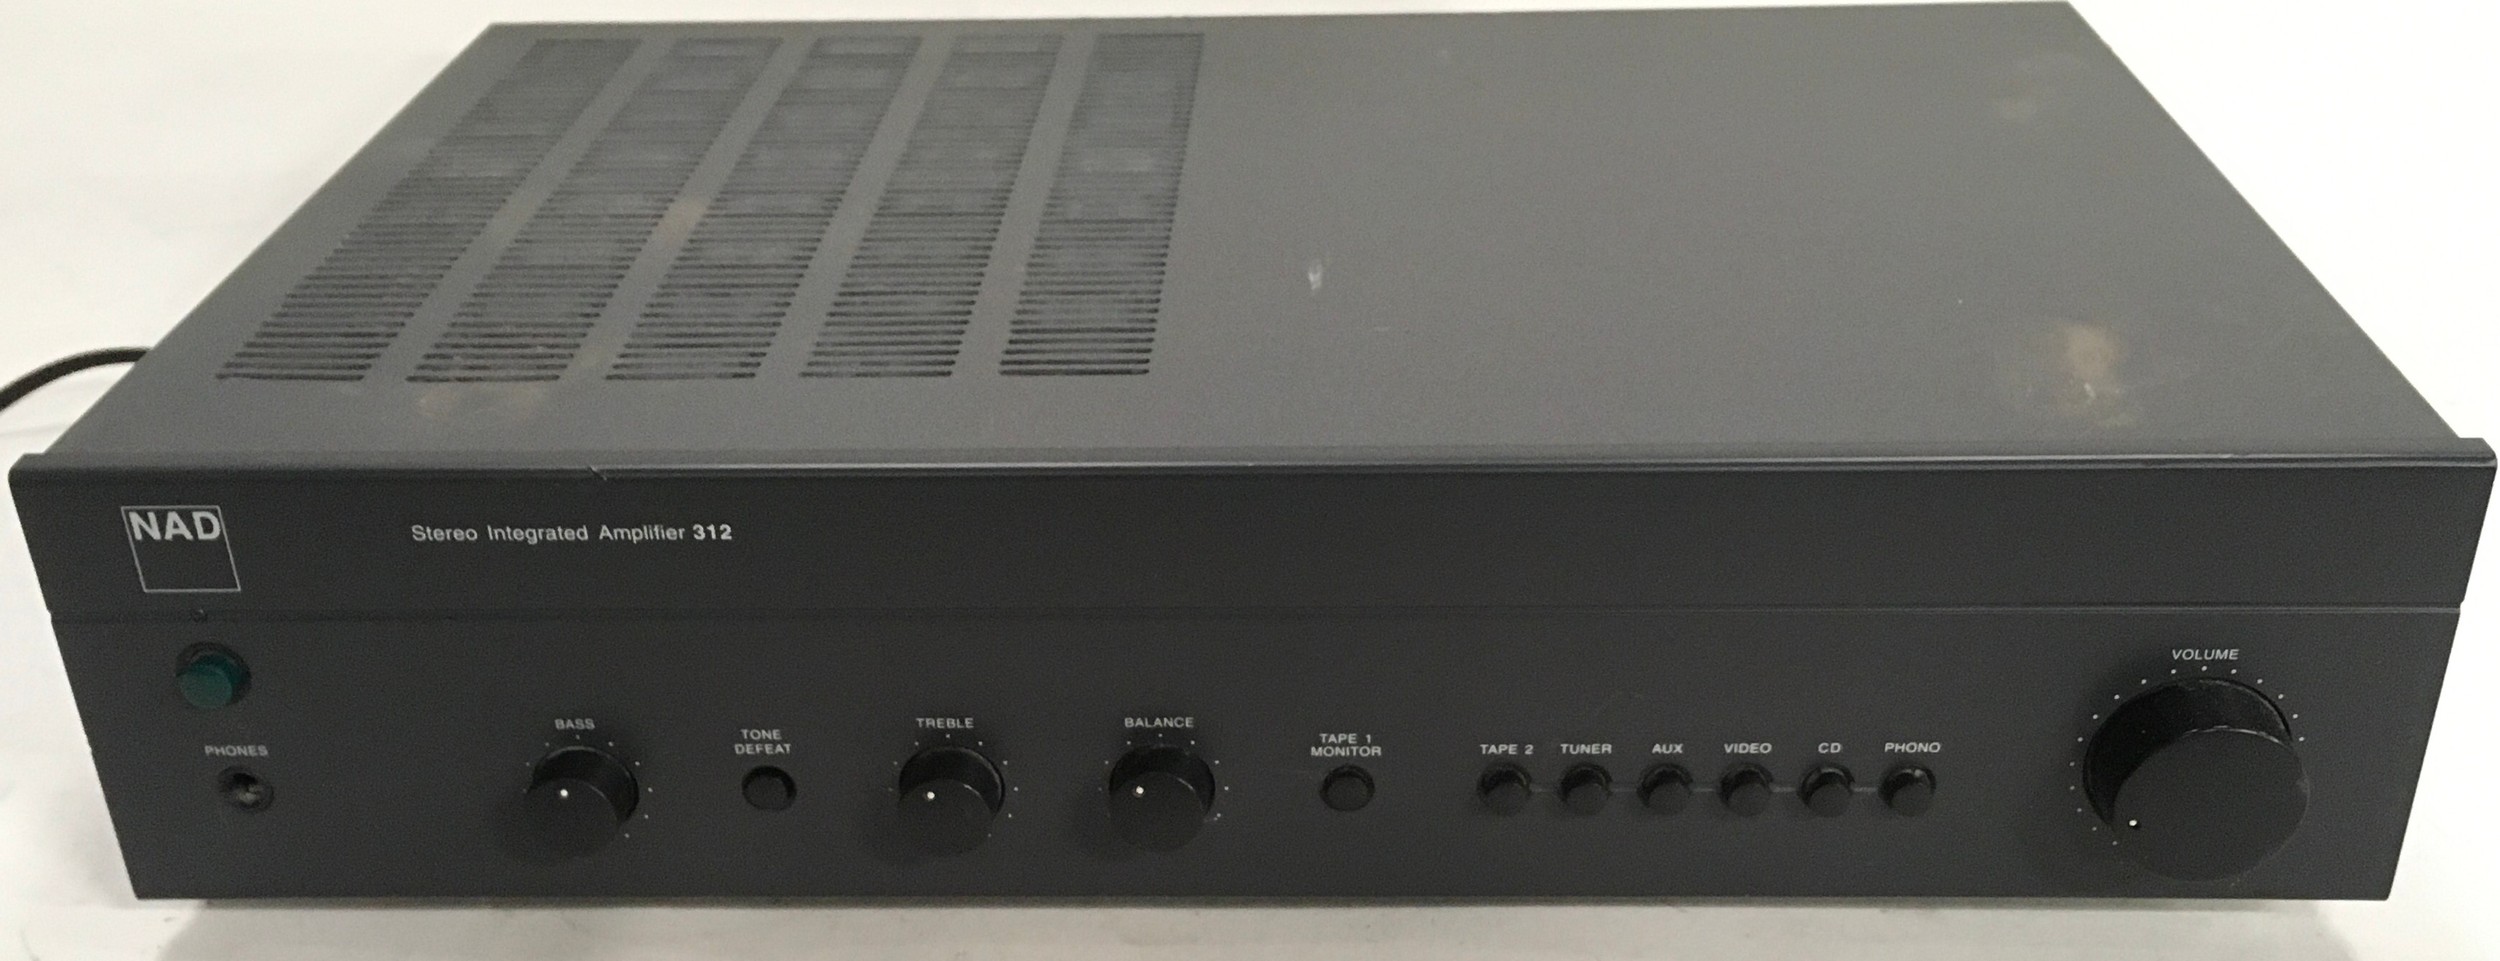 NAD stereo integrated amplifier ref 312